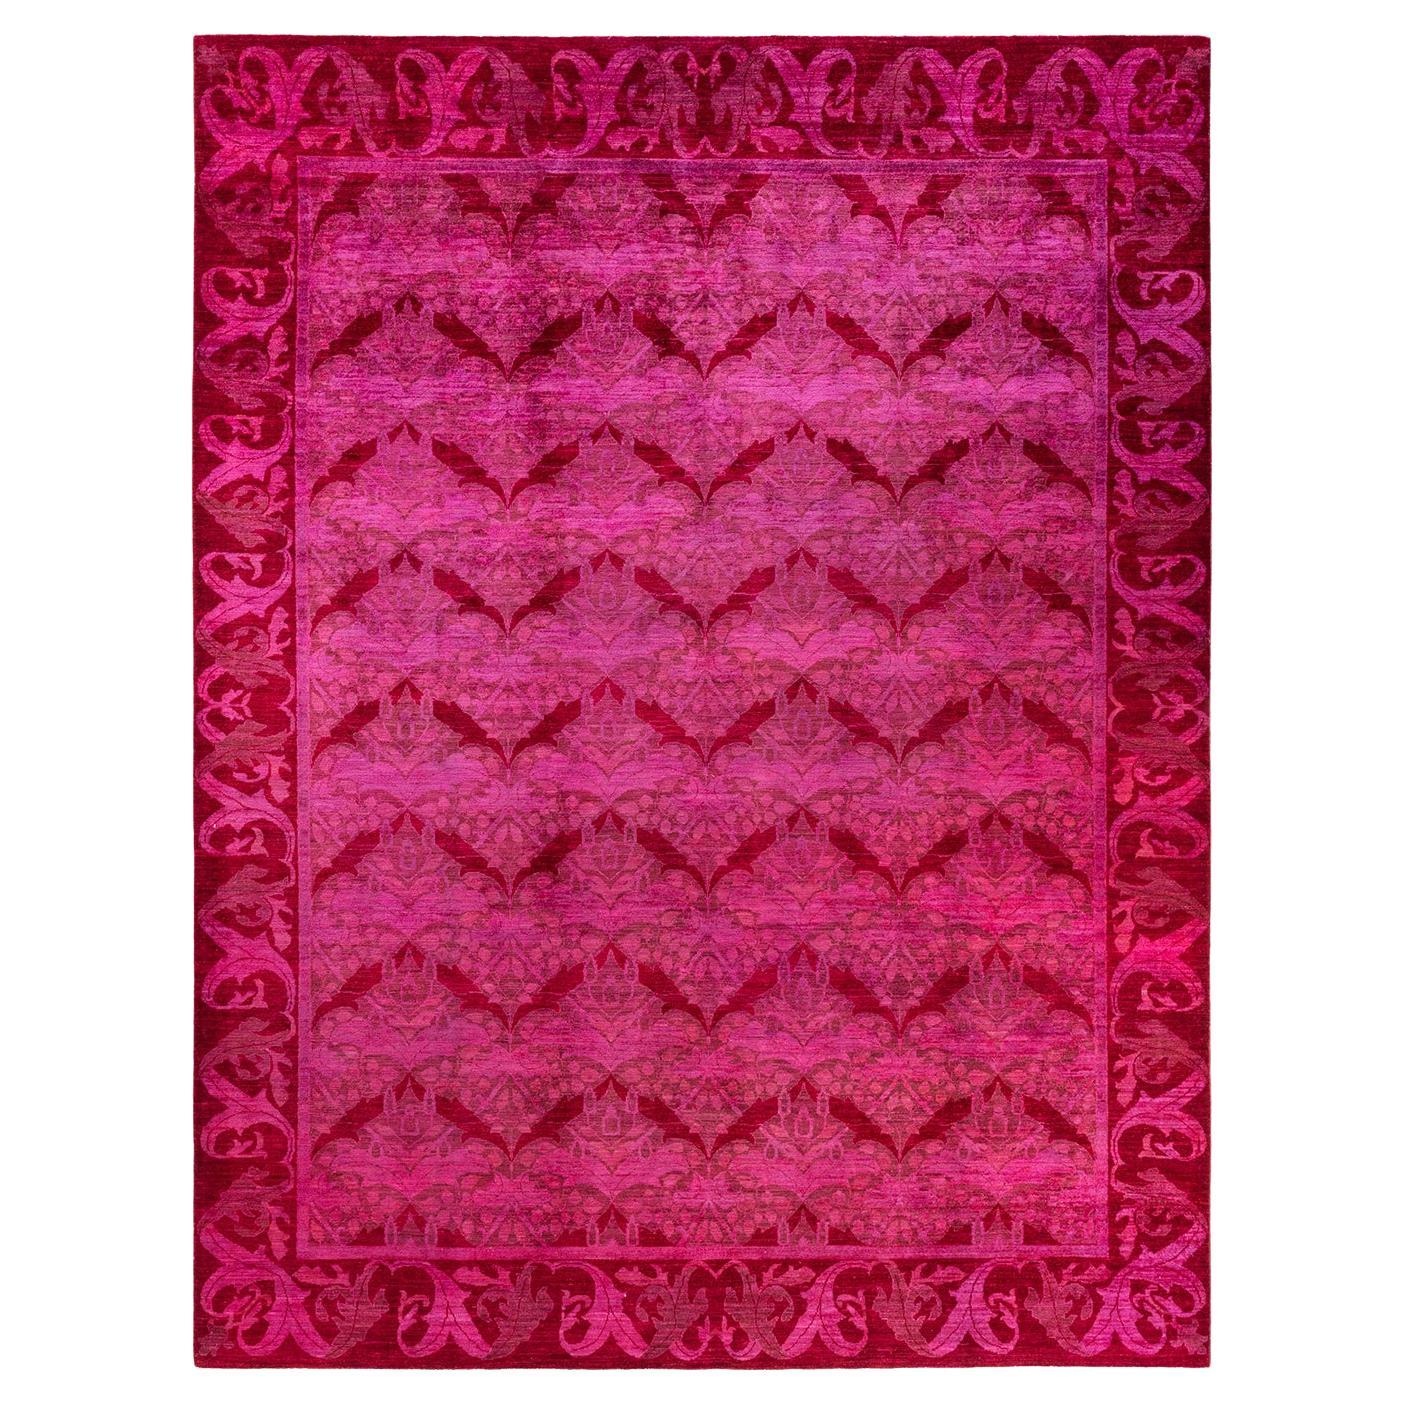 One of a Kind Hand Knotted Contemporary Overdyed Pink Area Rug